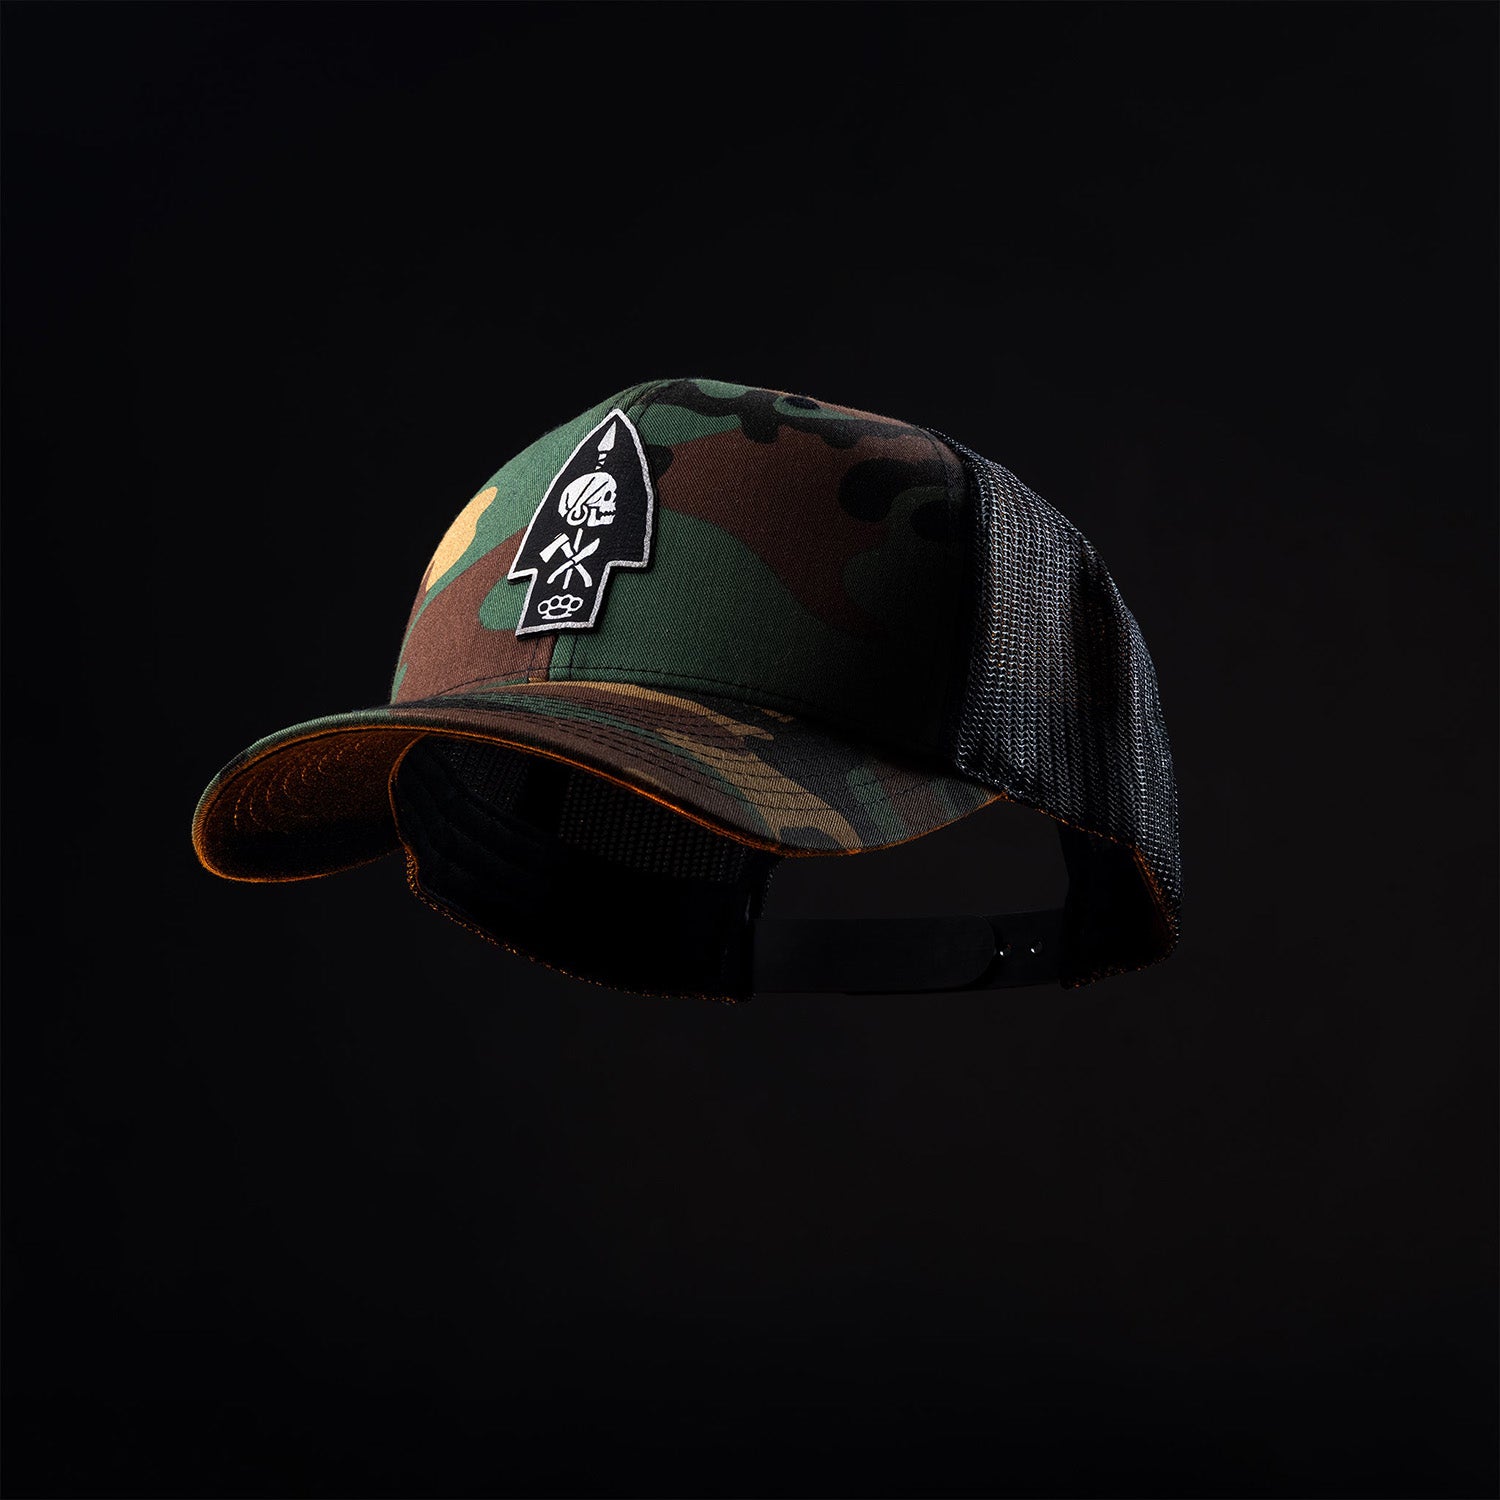 The M81A2 Hat - Woodland Camo